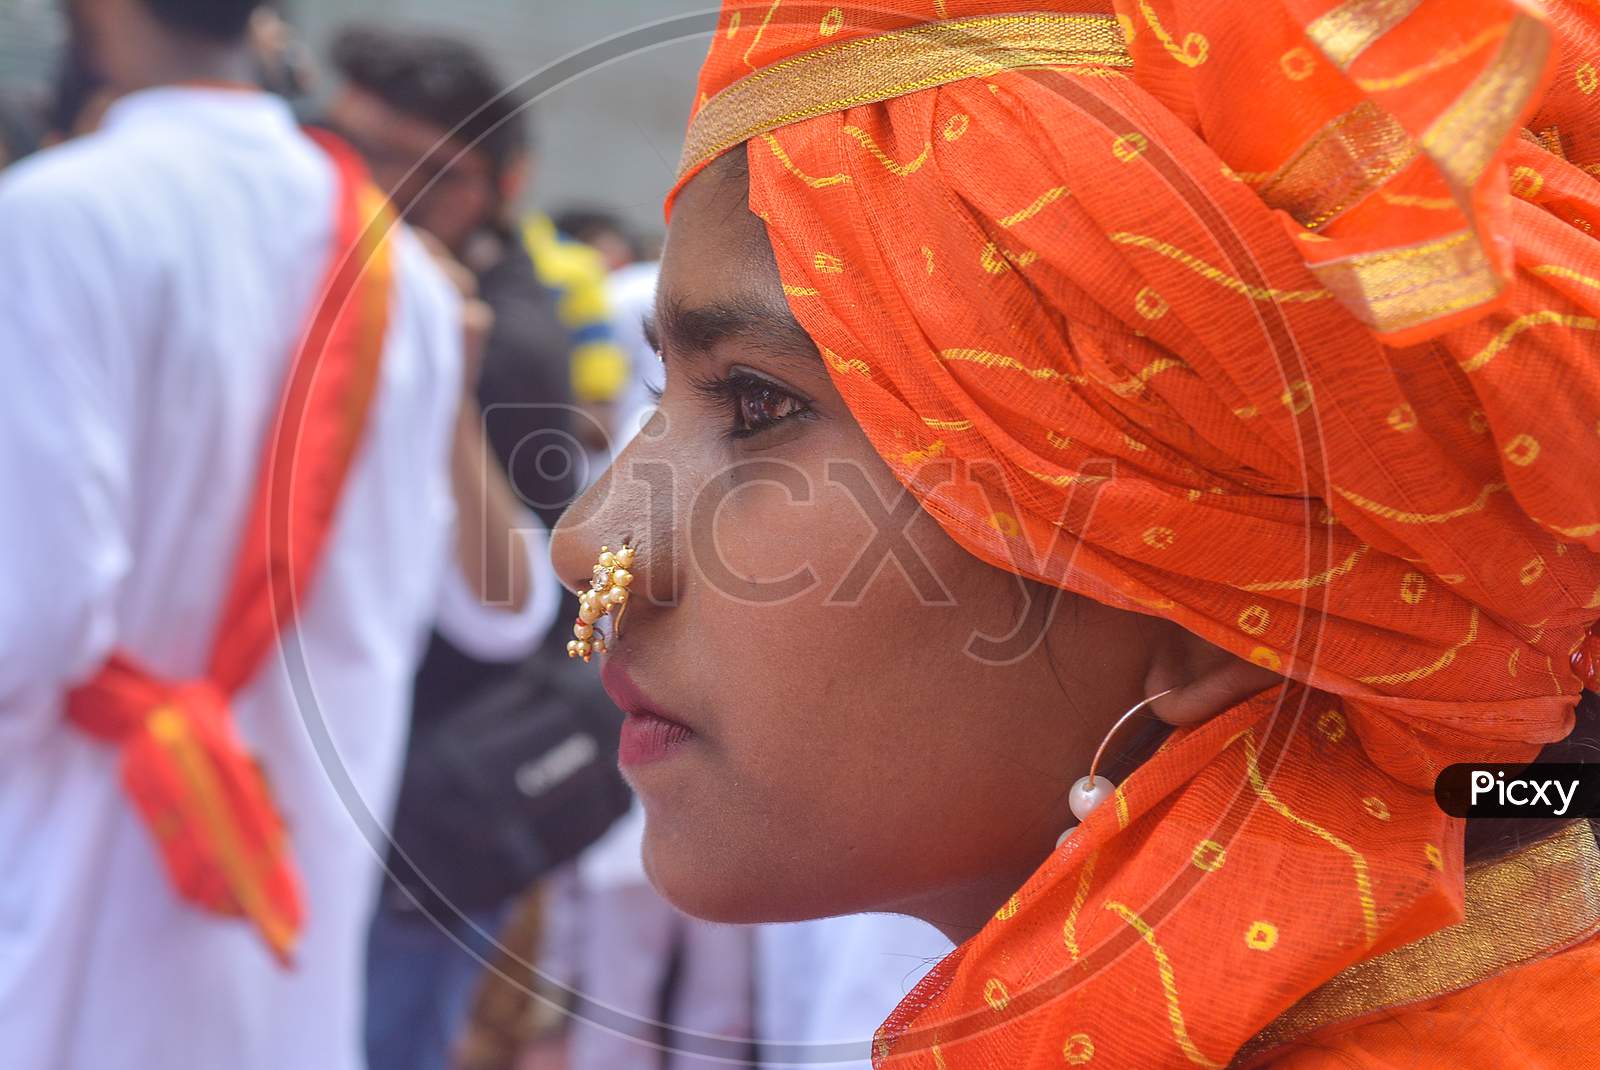 Pune, India - September 4, 2017: Closeup Of A Girl Wearing A Nath / Nose Ring With Her Traditional Ethnic Clothes. Ganpati Visarjan Celebration In Pune.